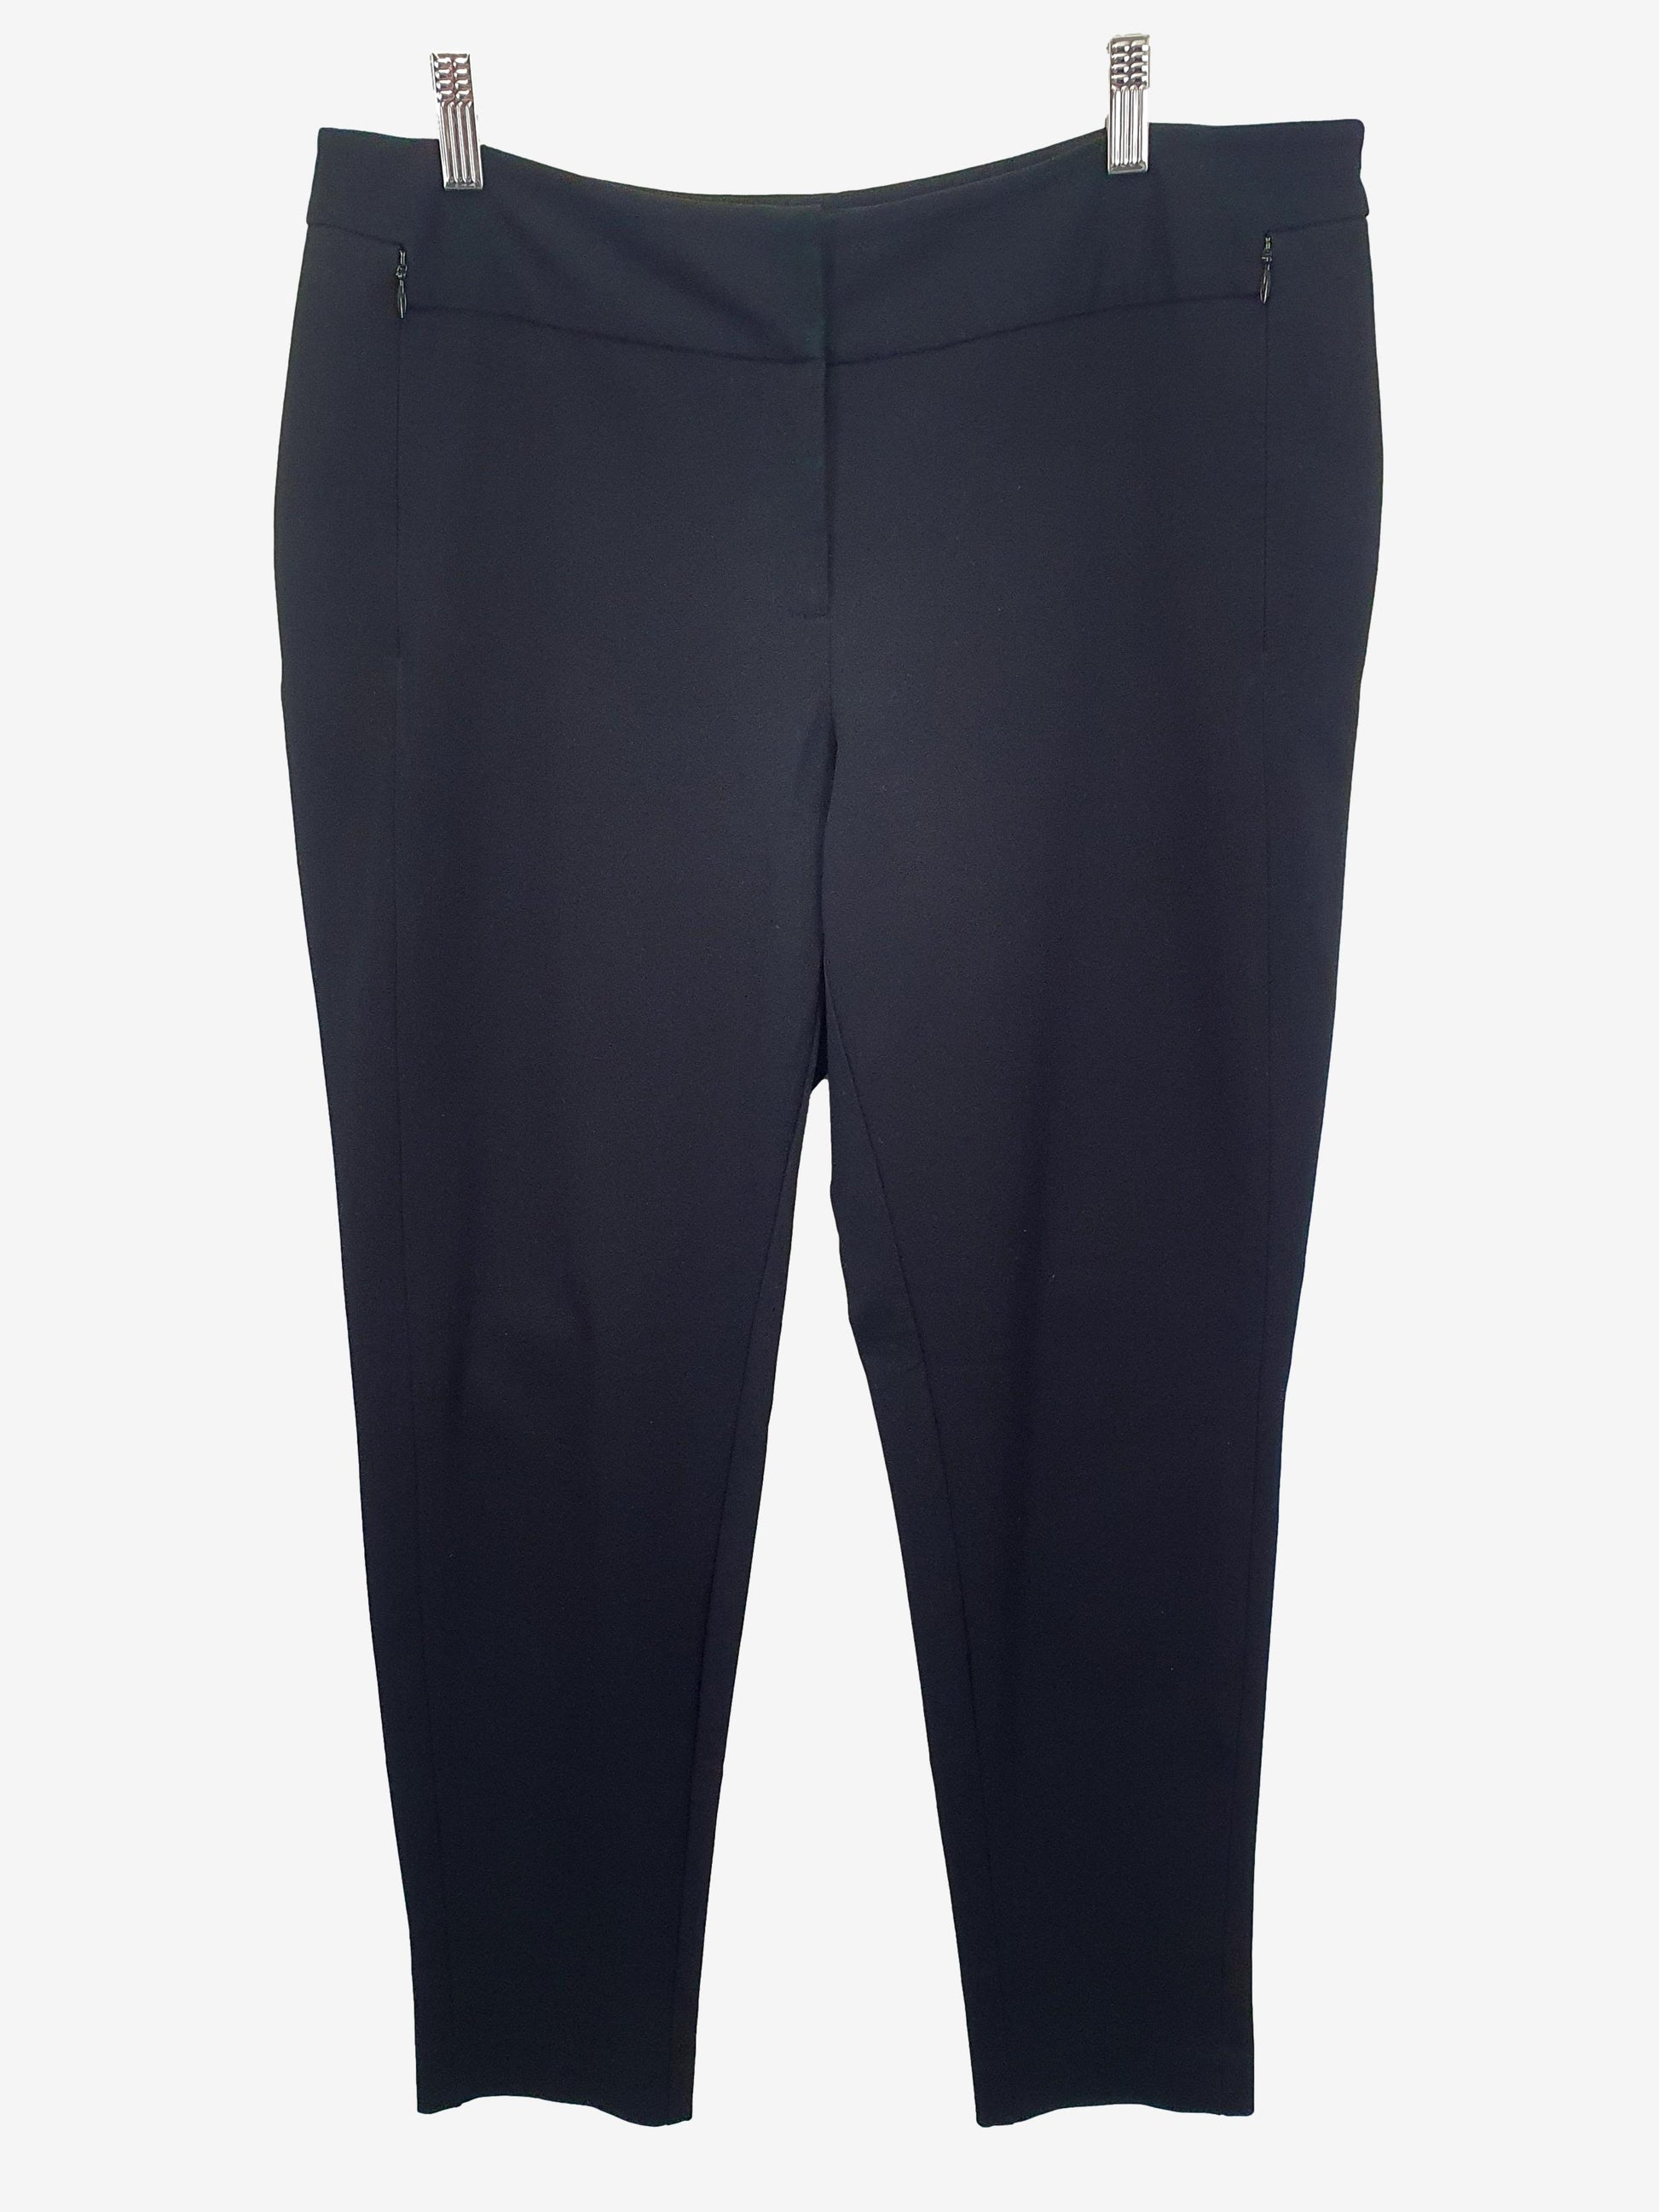 Review Staple Office Style Stretch Pants Size 12 – SwapUp